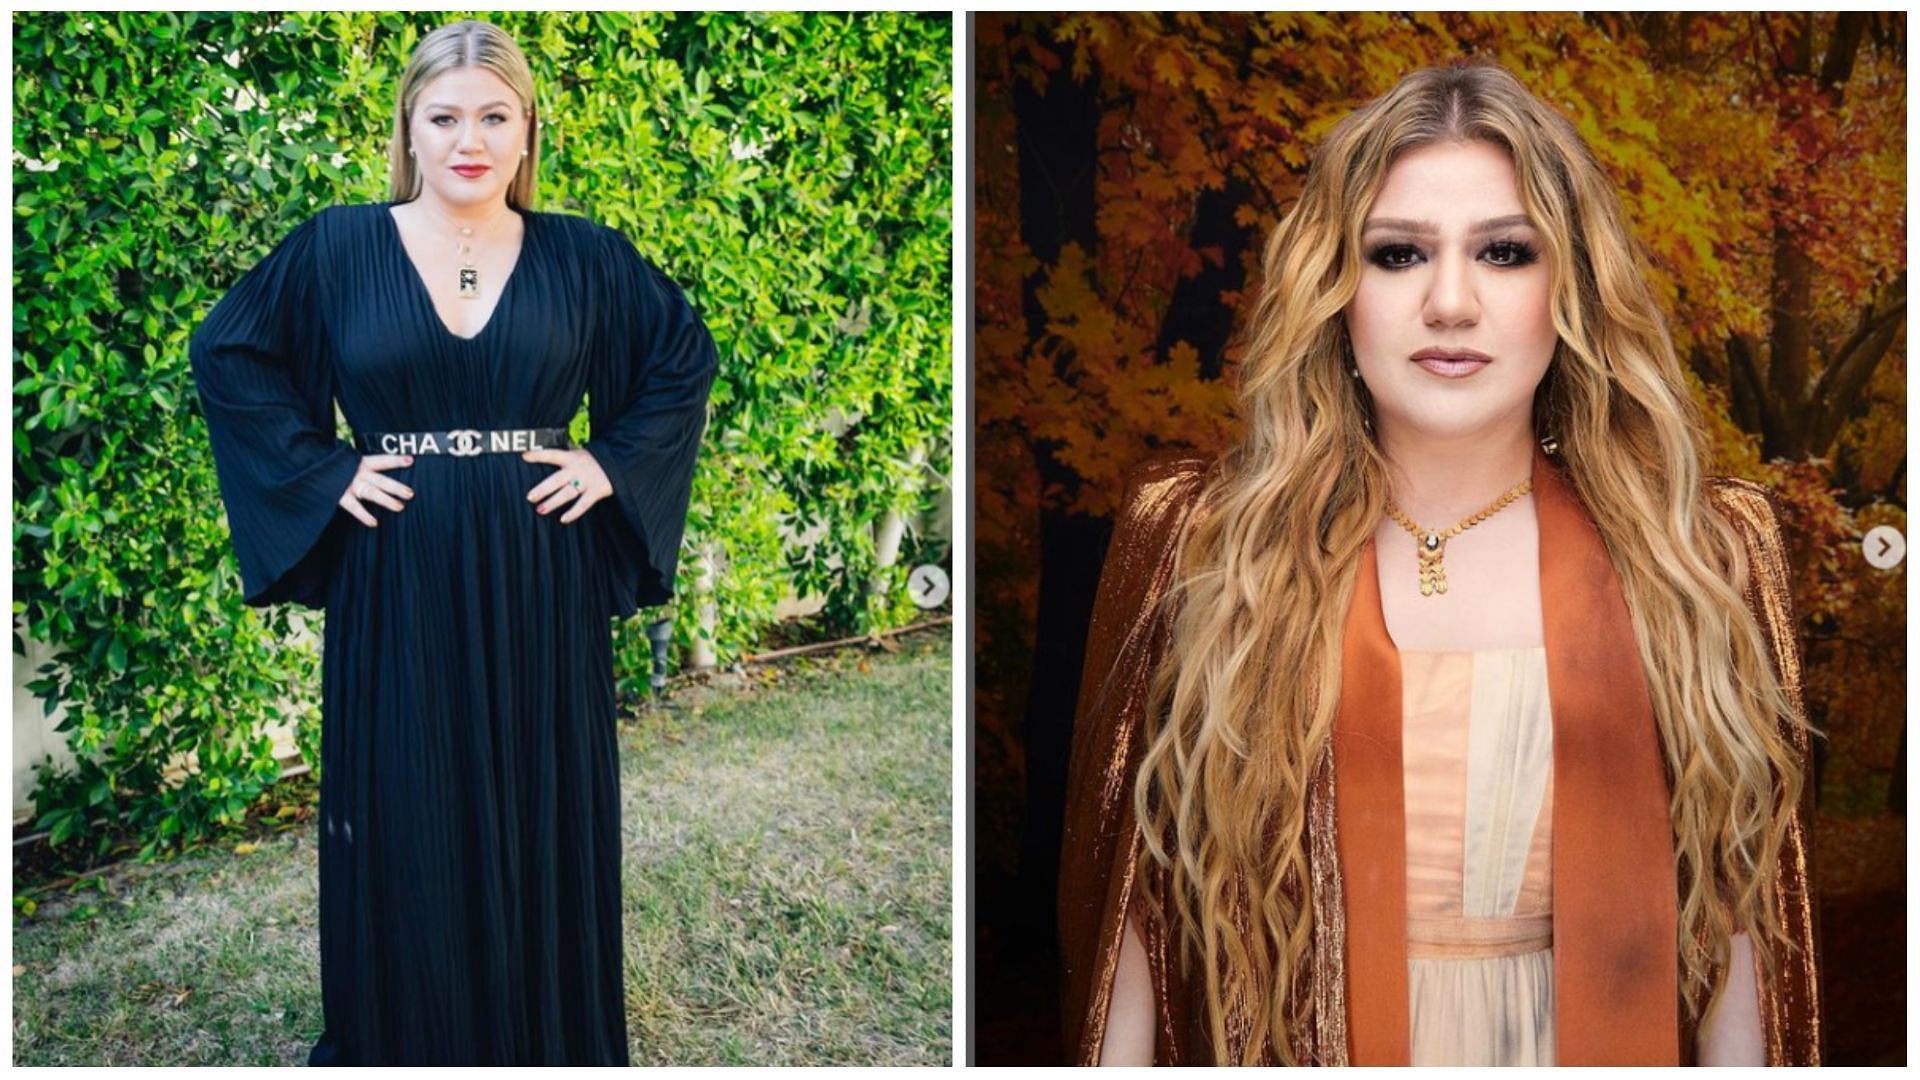 Kelly Clarkson's Weight Loss How Did The Star Lose 40 Pounds?